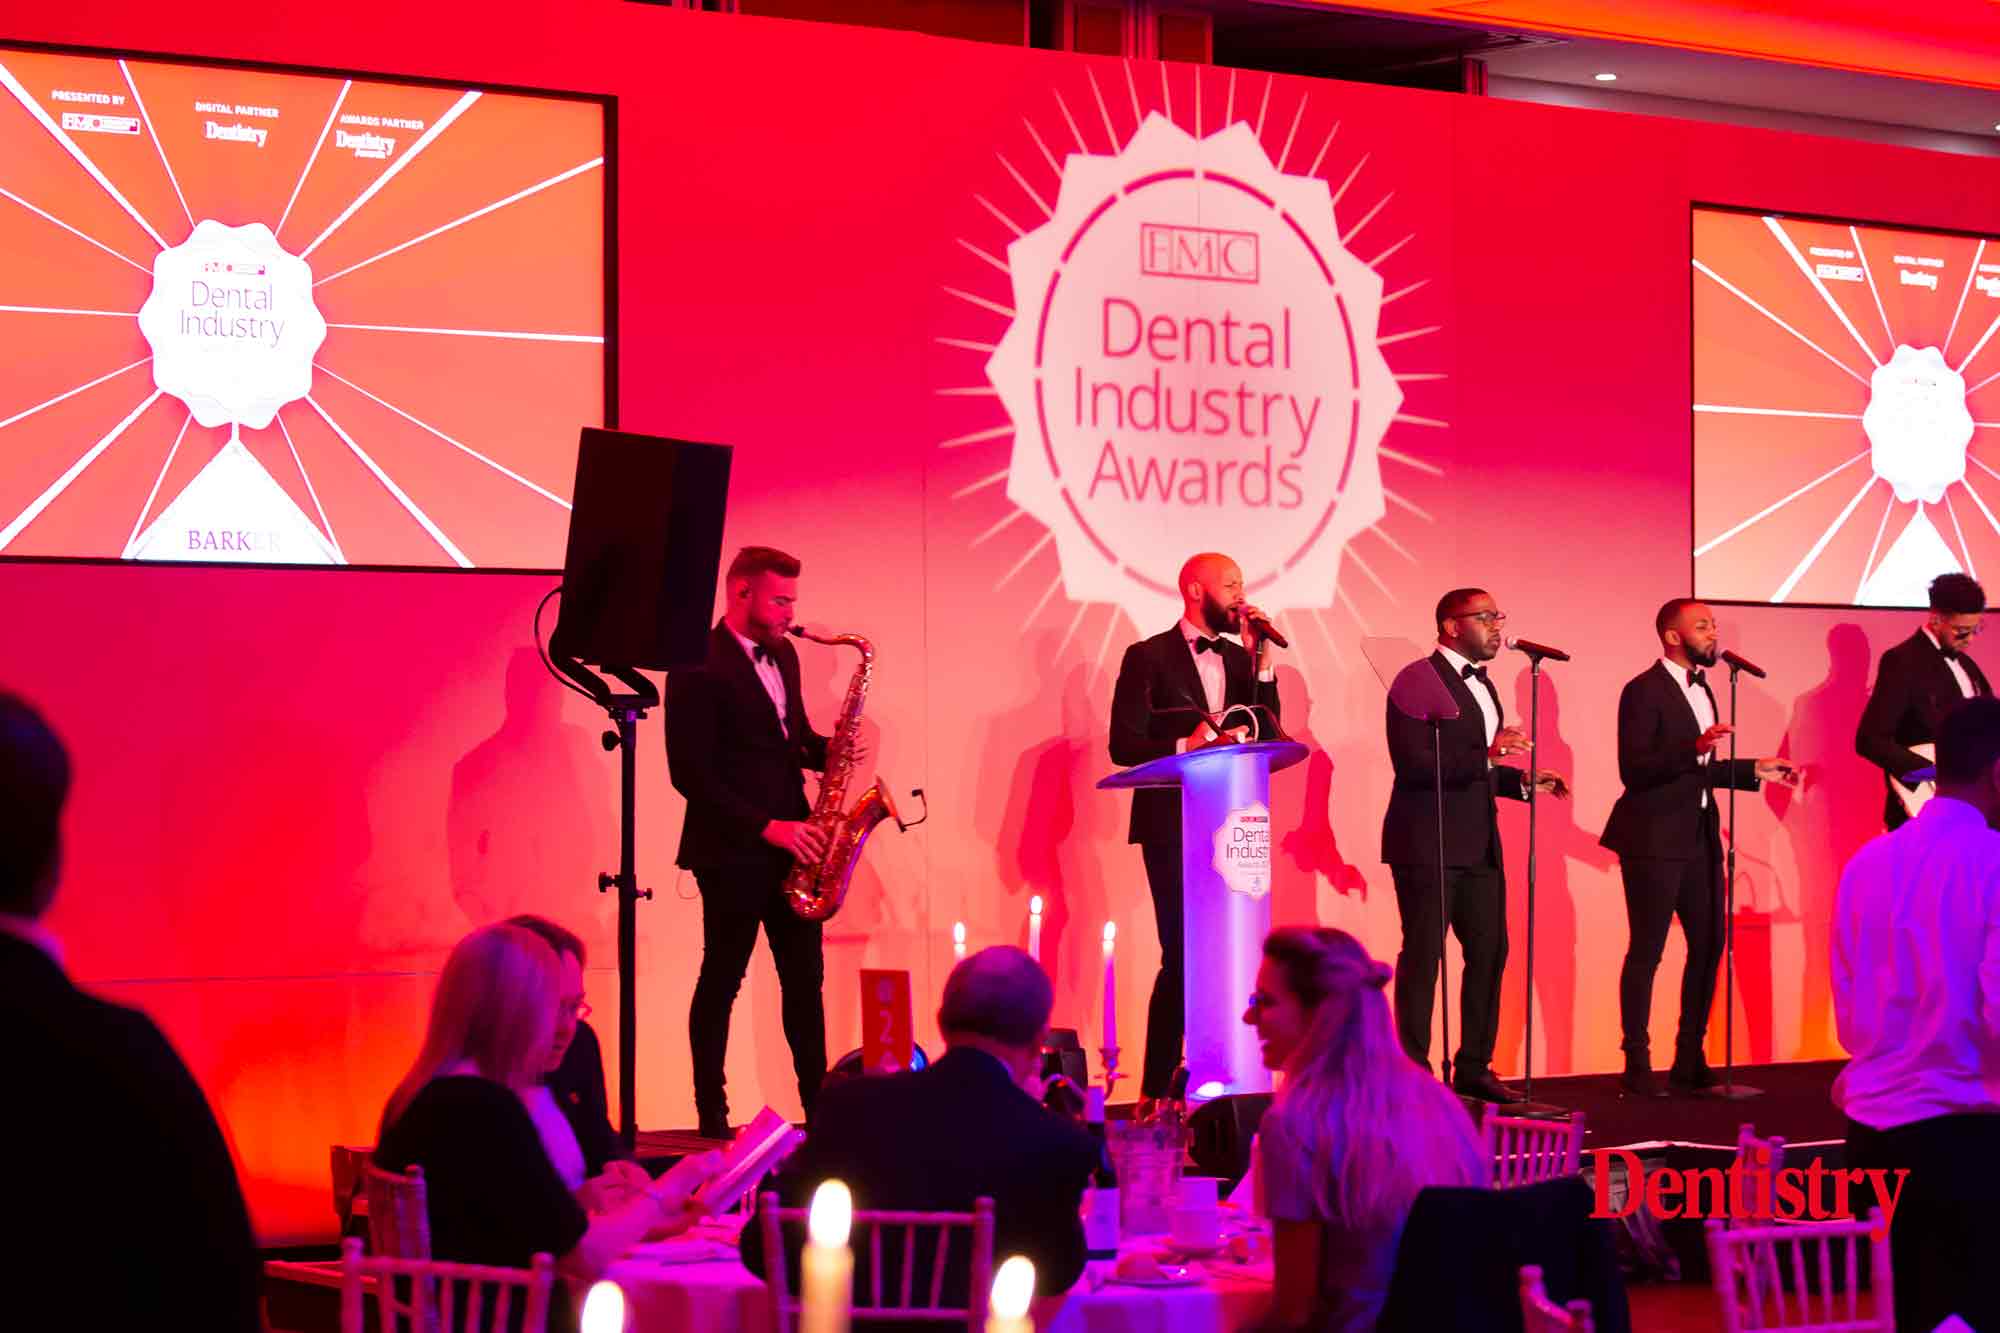 Apply for the Dental Industry Awards now!